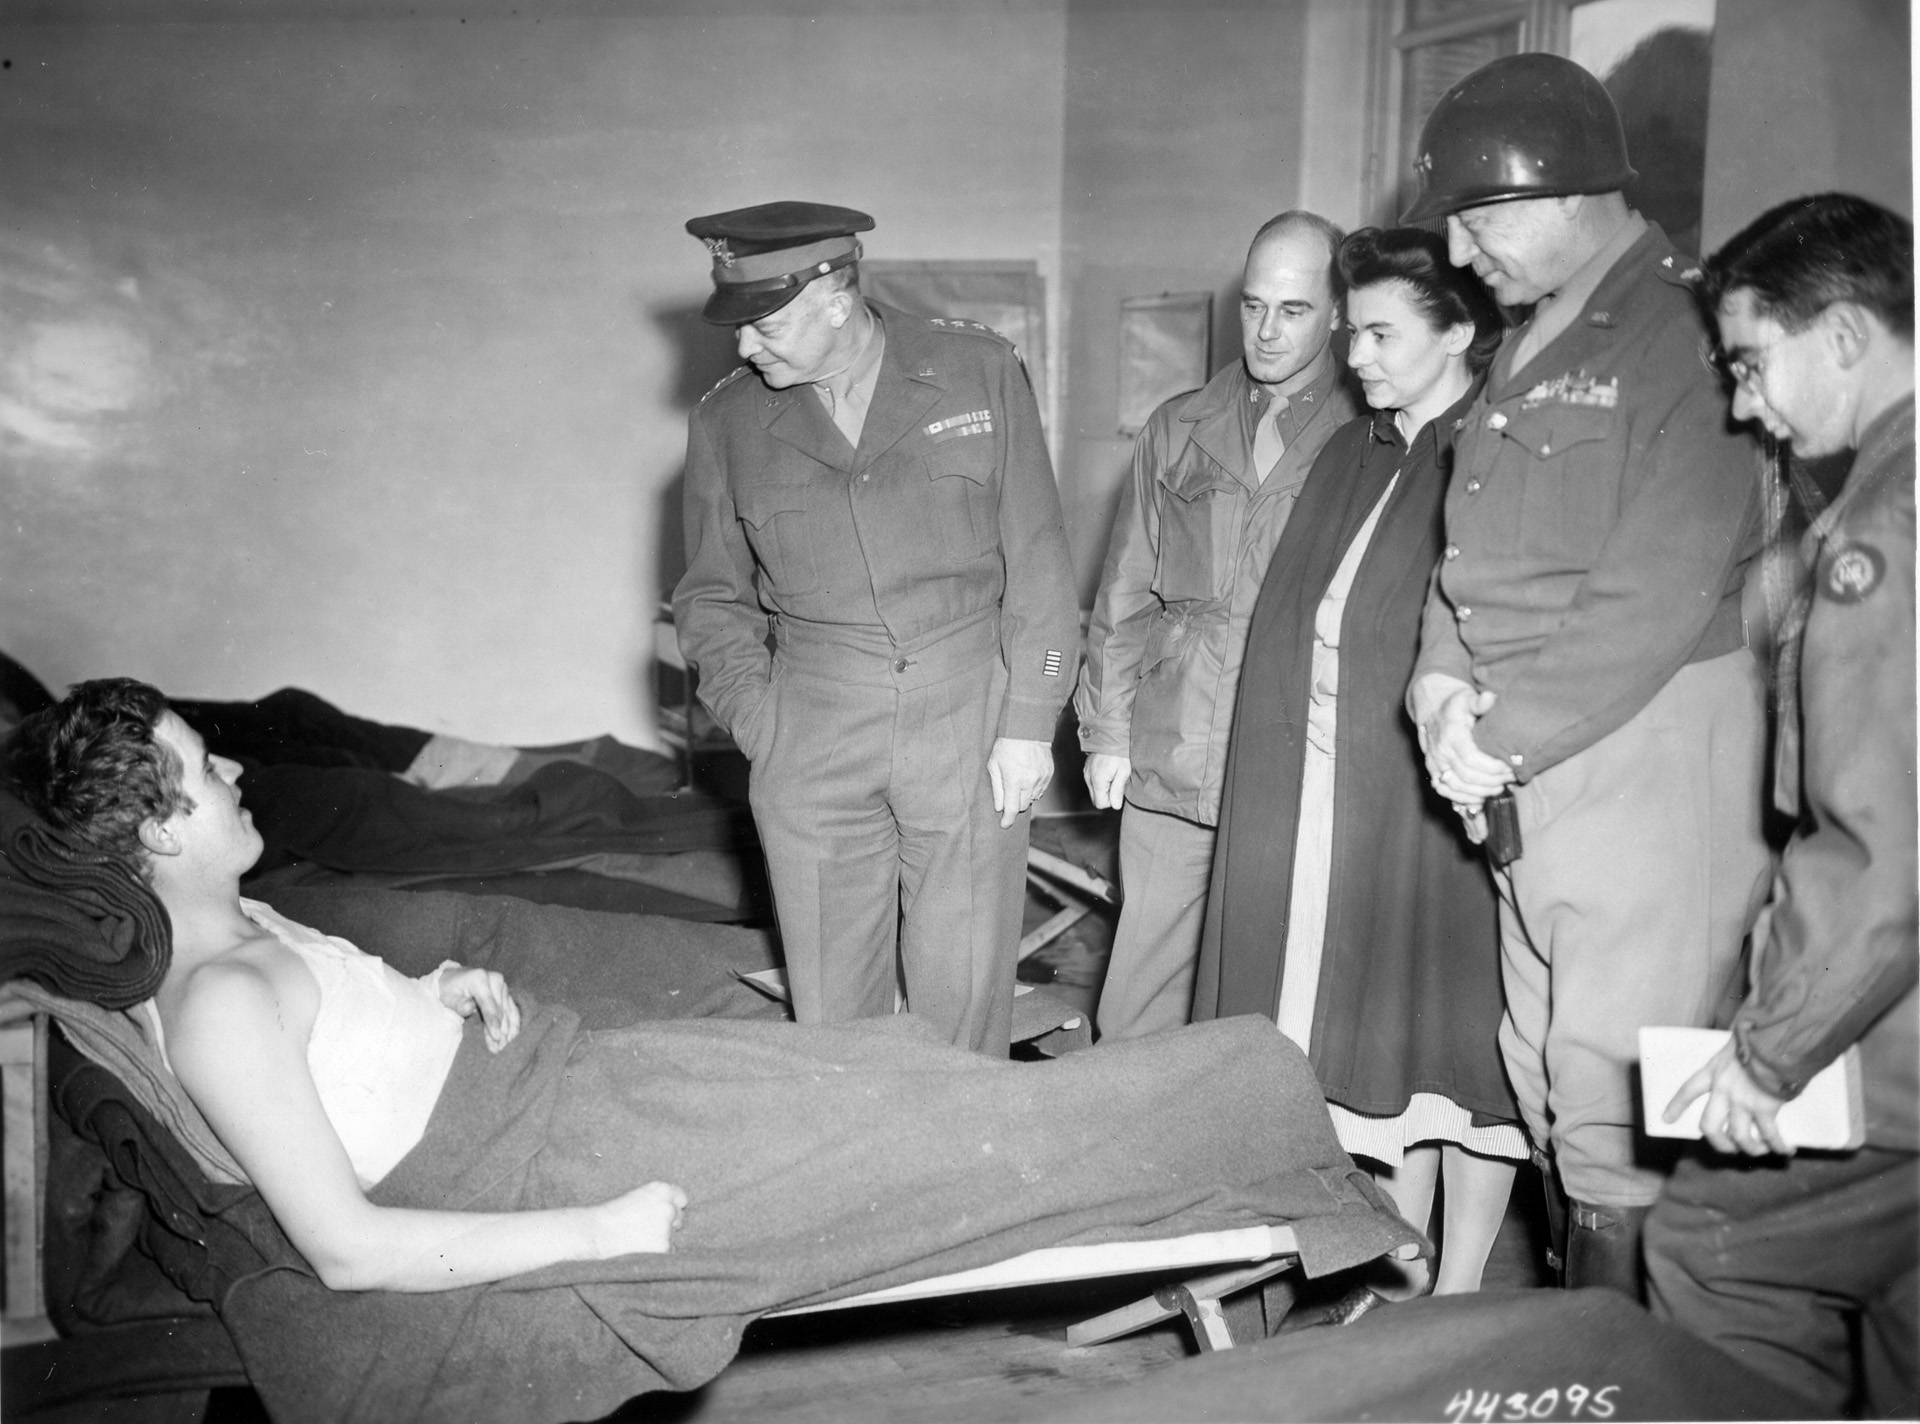 Eisenhower and Patton talk to Private Paul D. McDaniel of Maumee, Ohio, at the 12th Evacuation Hospital, while a doctor, nurse, and reporter look on. 